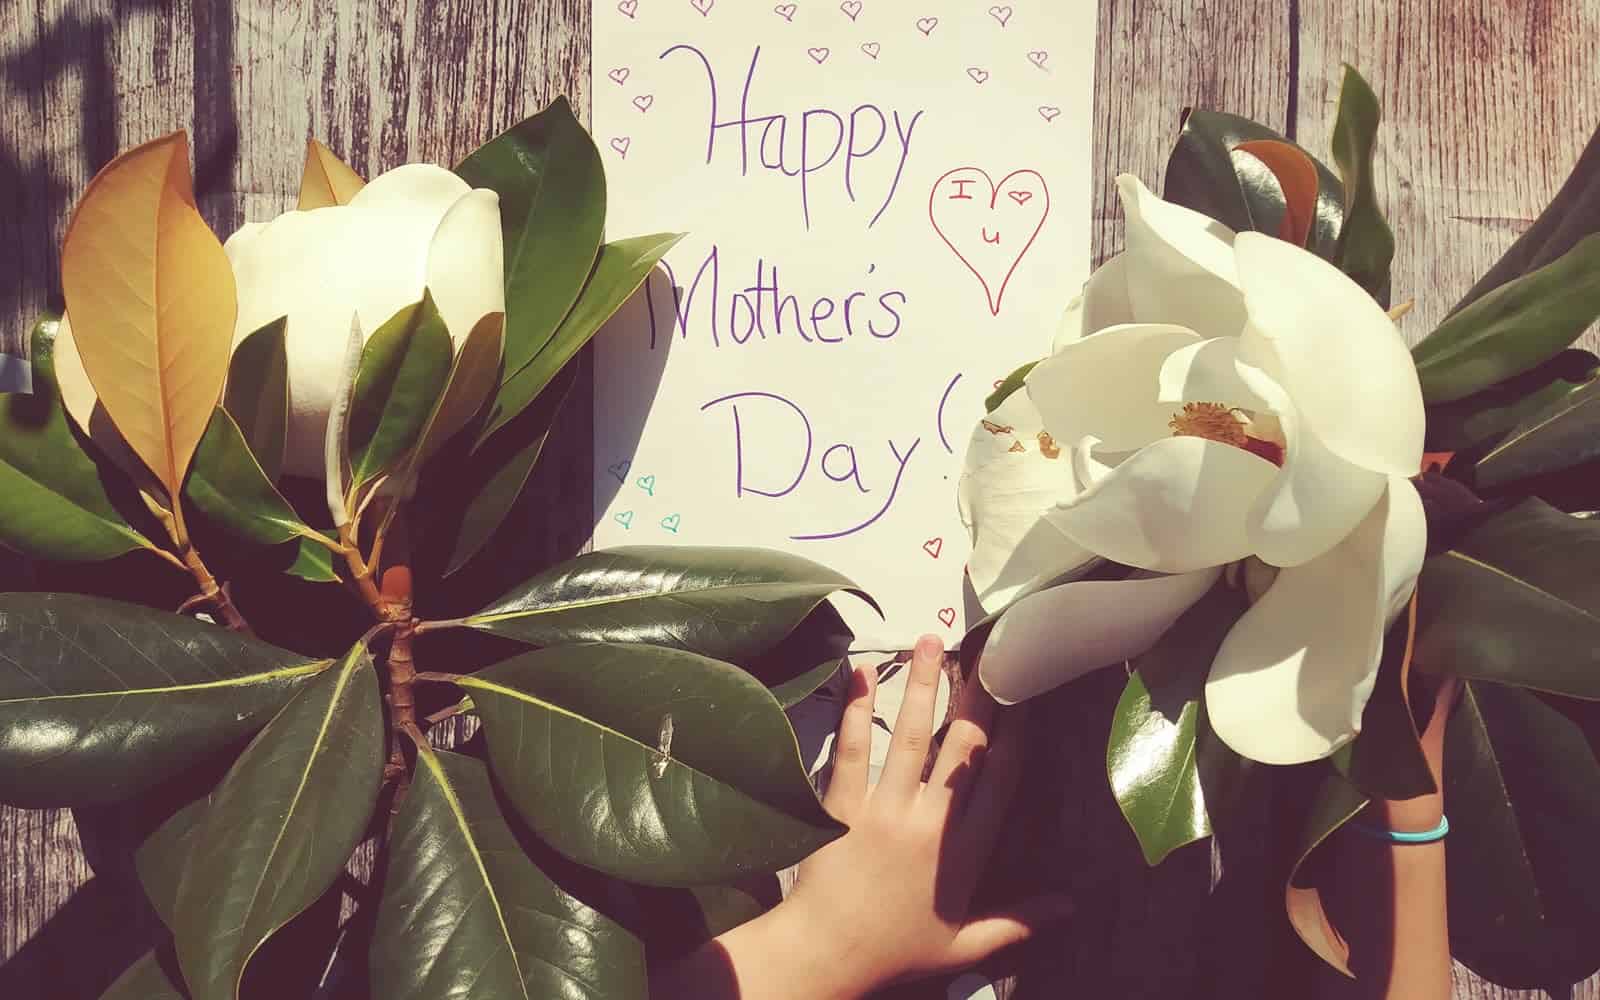 6 Simple Ways to Show Her You Care on Mother’s Day